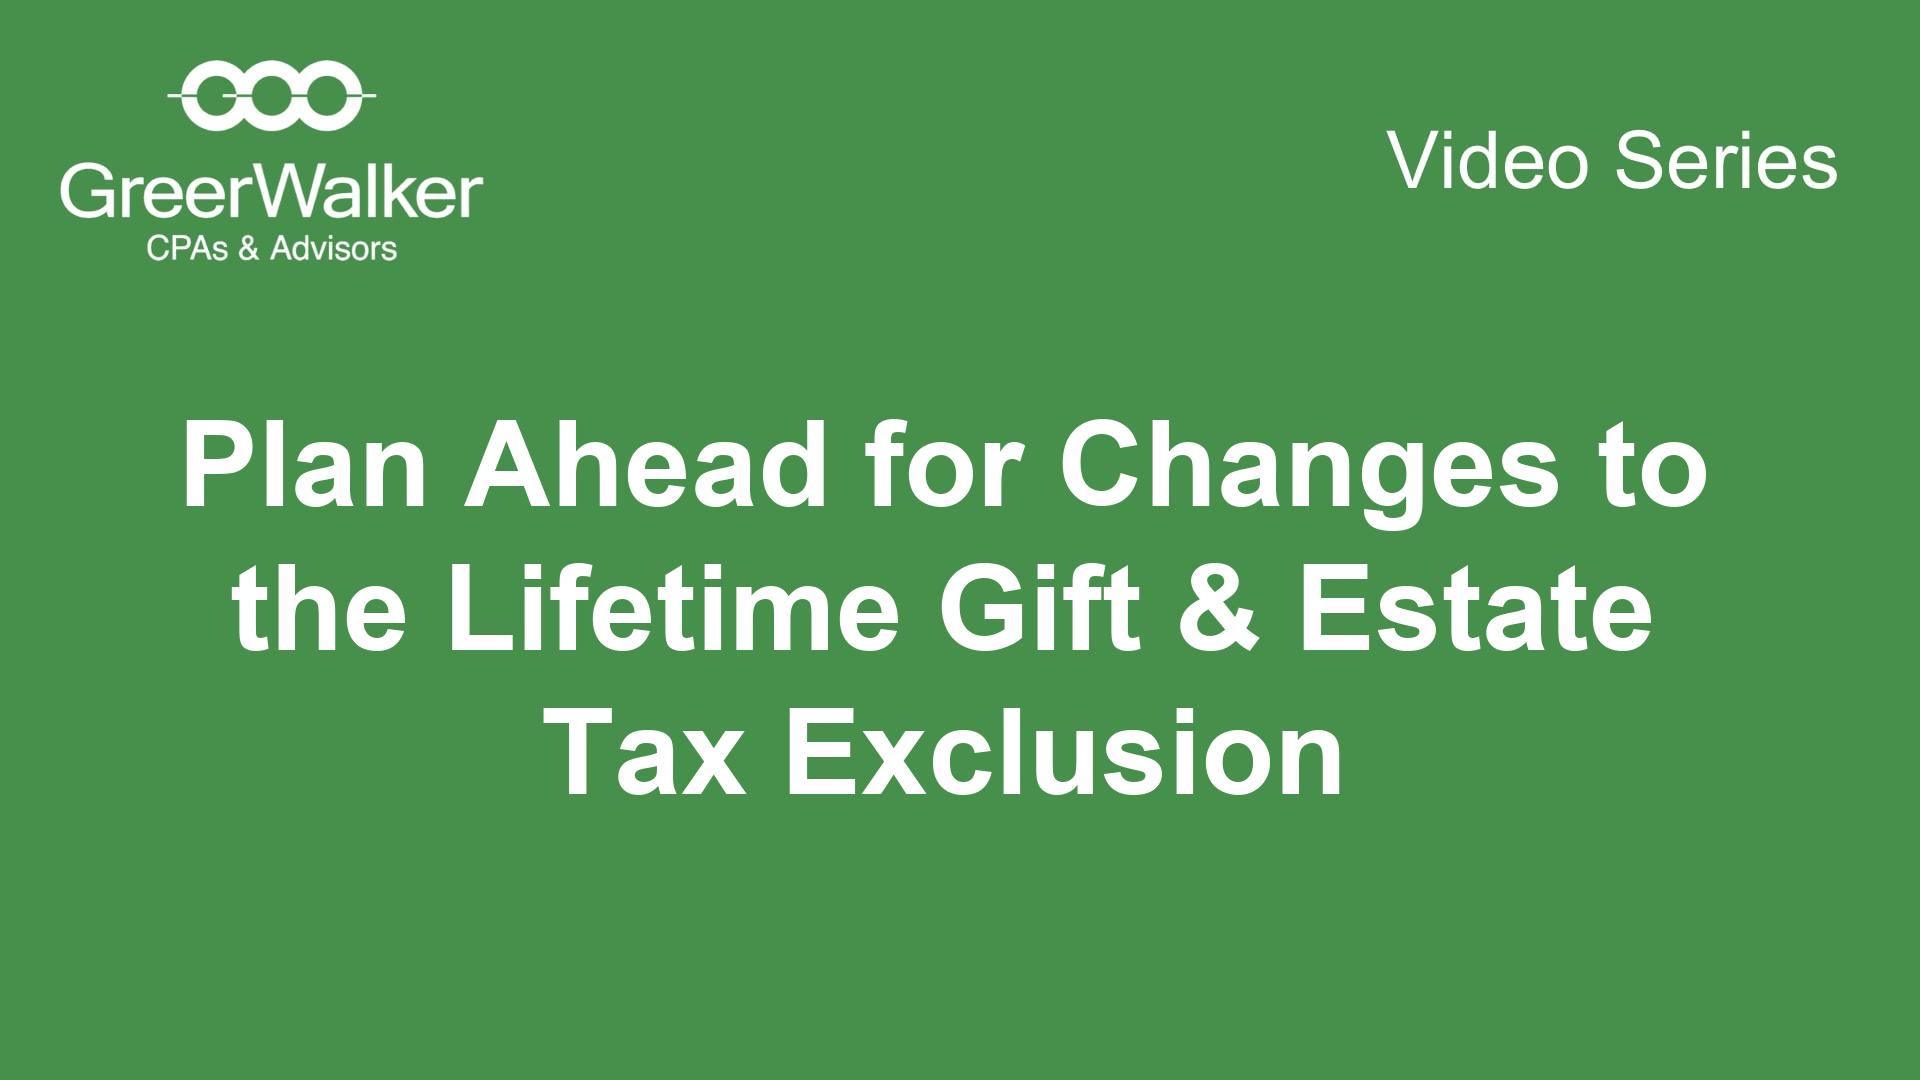 Plan Ahead for Changes to the Lifetime Gift & Estate Tax Exclusion